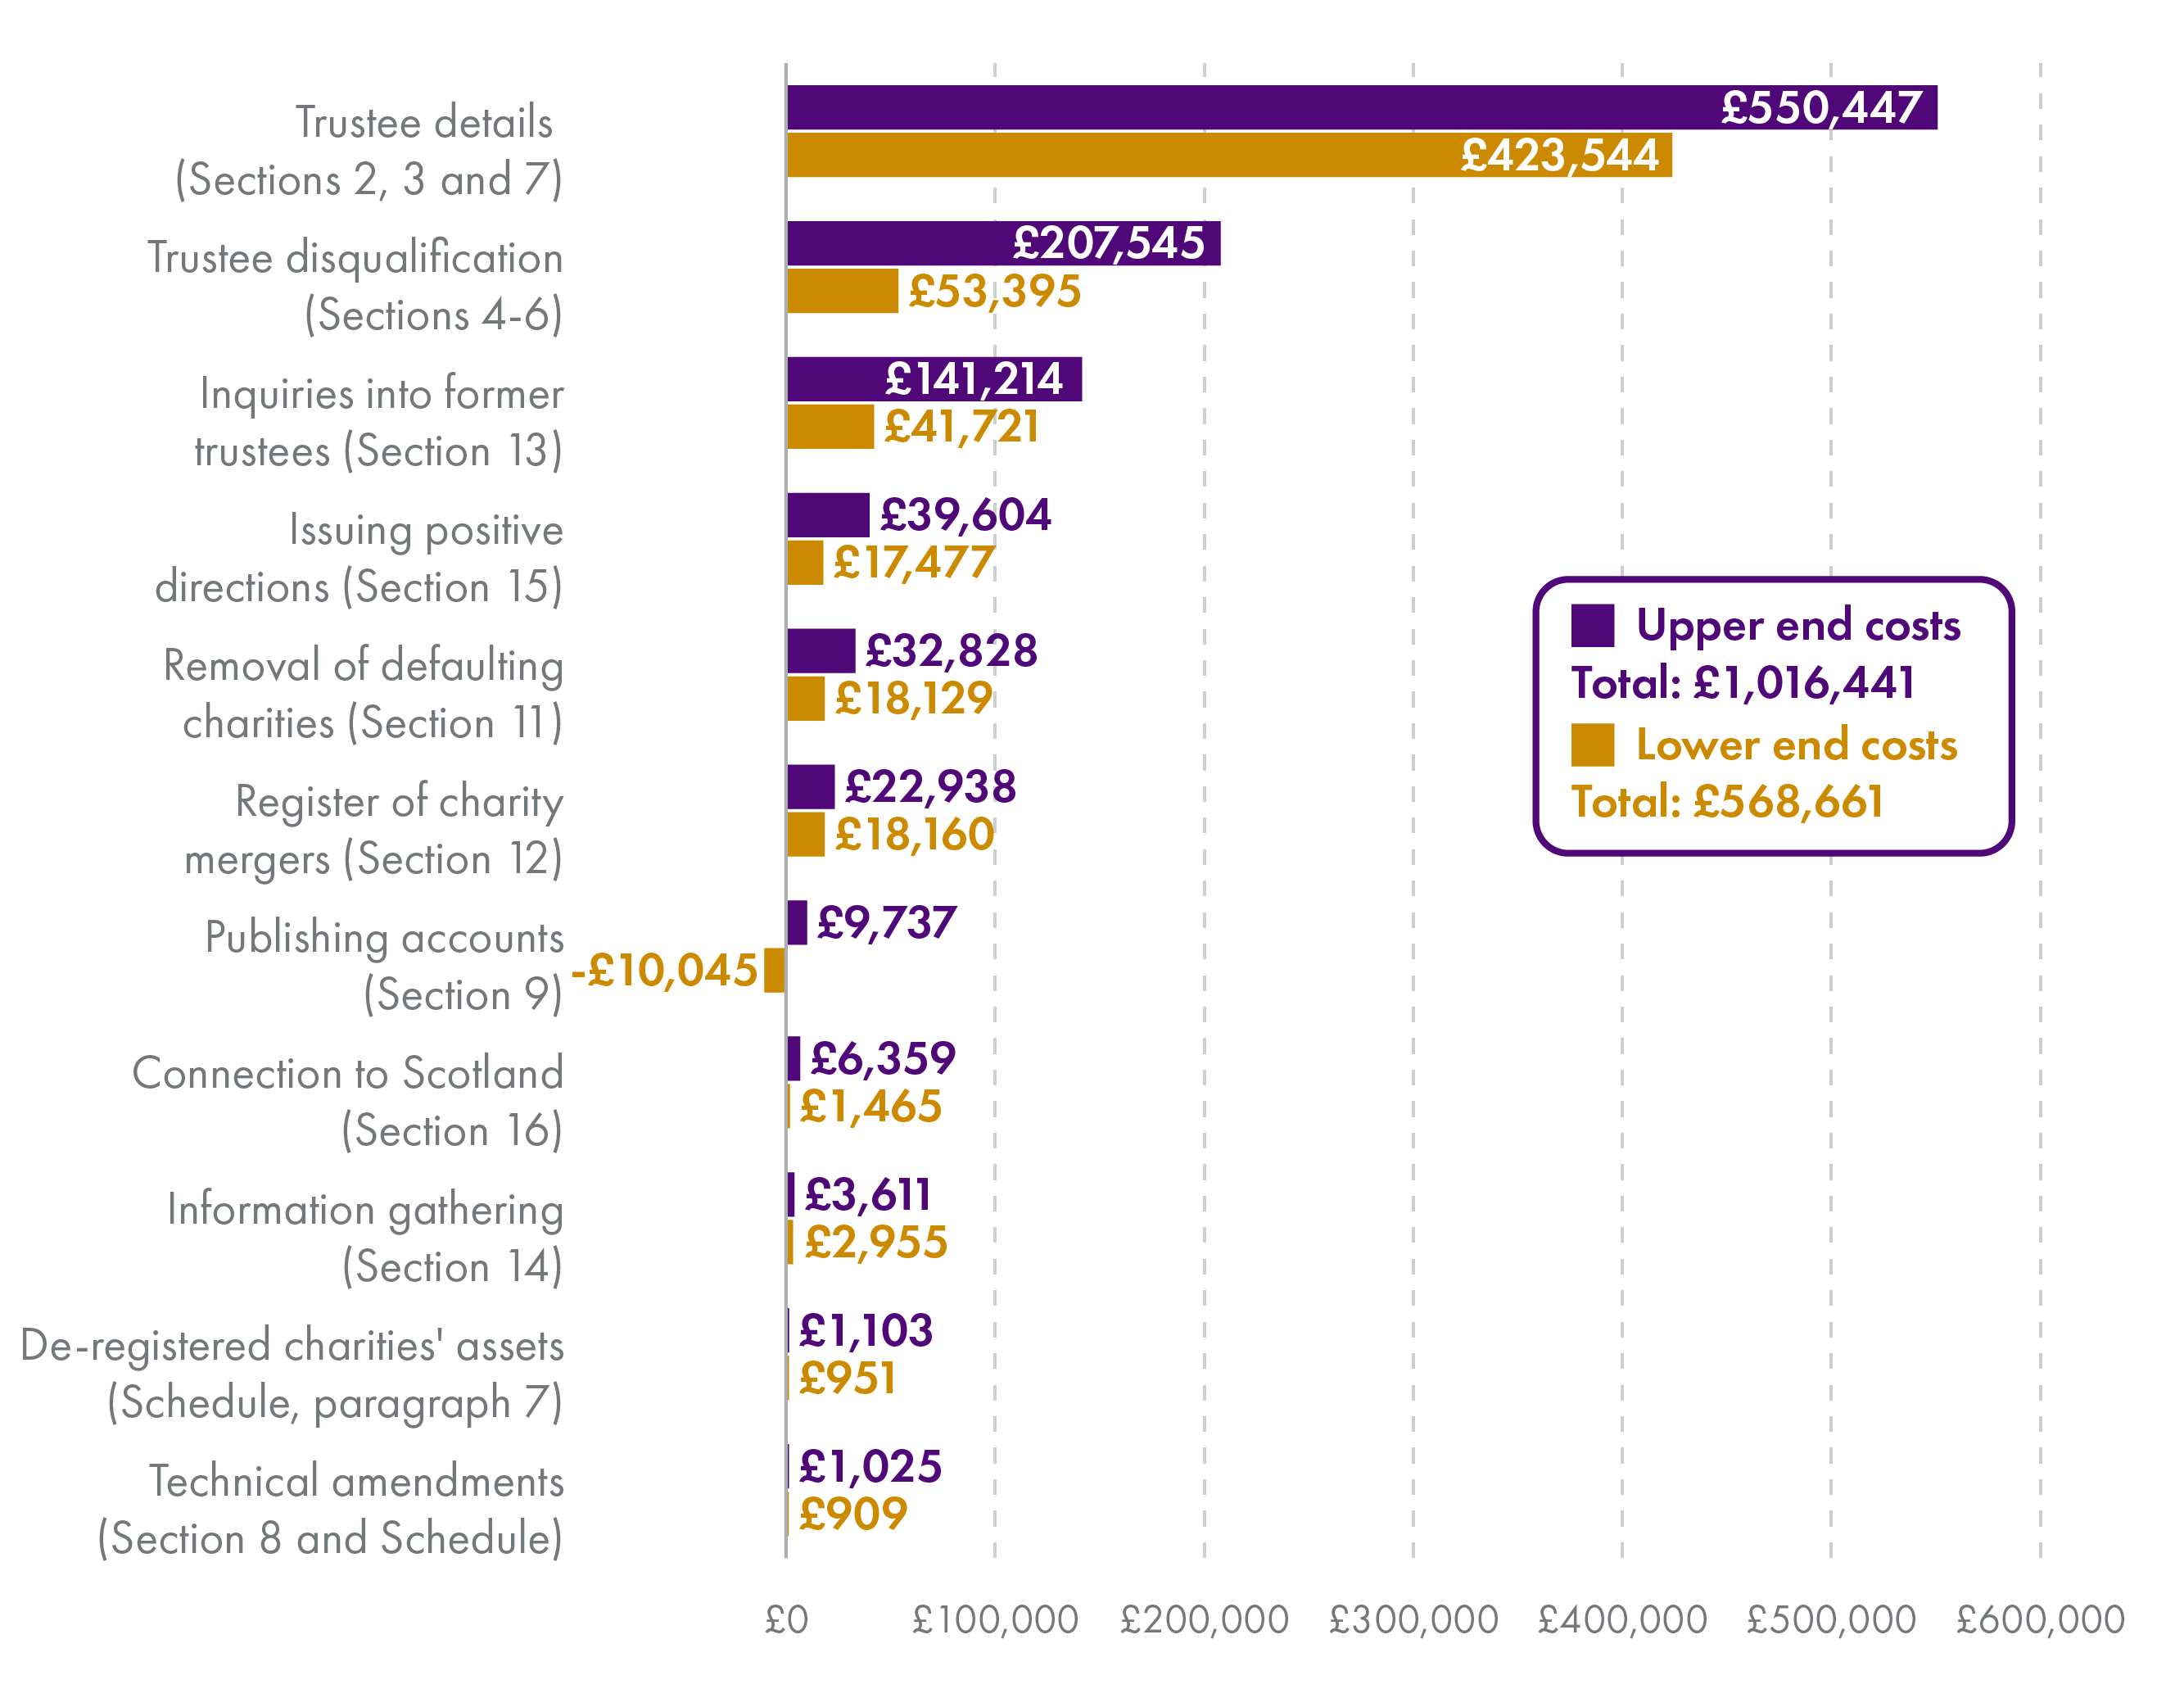 Image showing estimated costs of implementing Bill provisions over three years